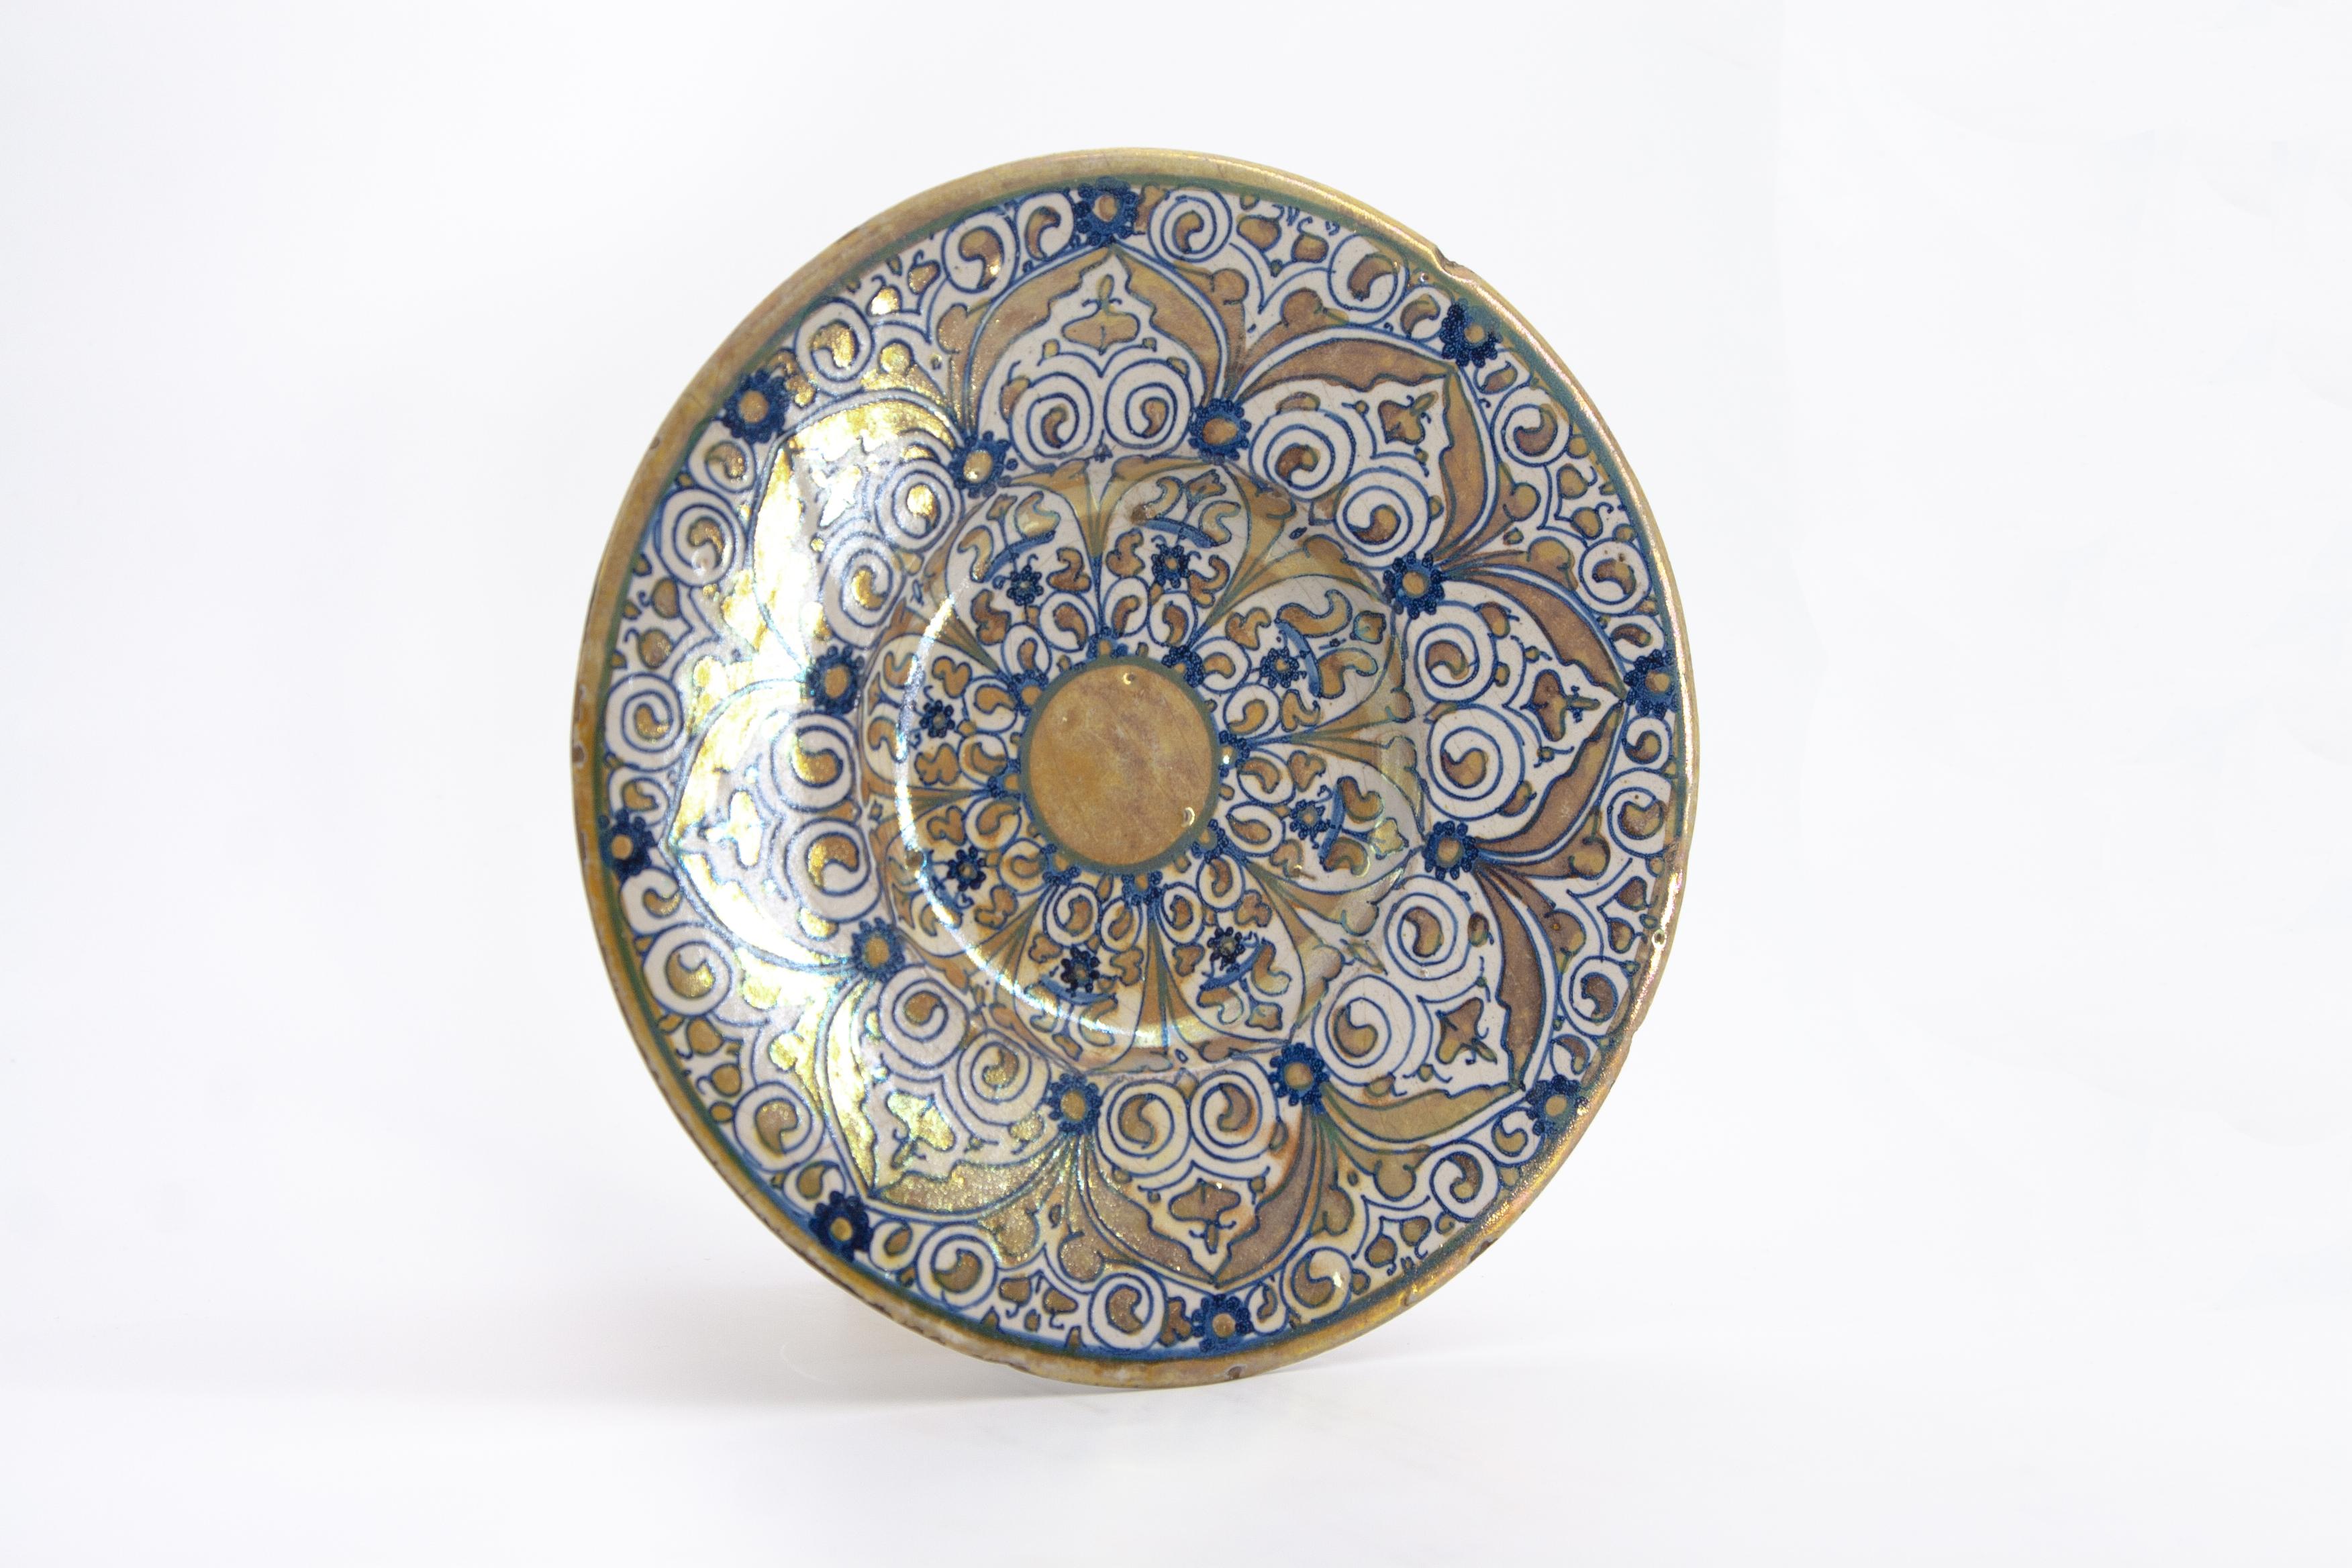 An Italian maiolica lustre dish, made in Deruta around 1530 during the height of the Renaissance.

Lustreware, a specialty of Deruta ceramics, epitomizes the ways in which technologies and aesthetics move and persevere through time and space. The